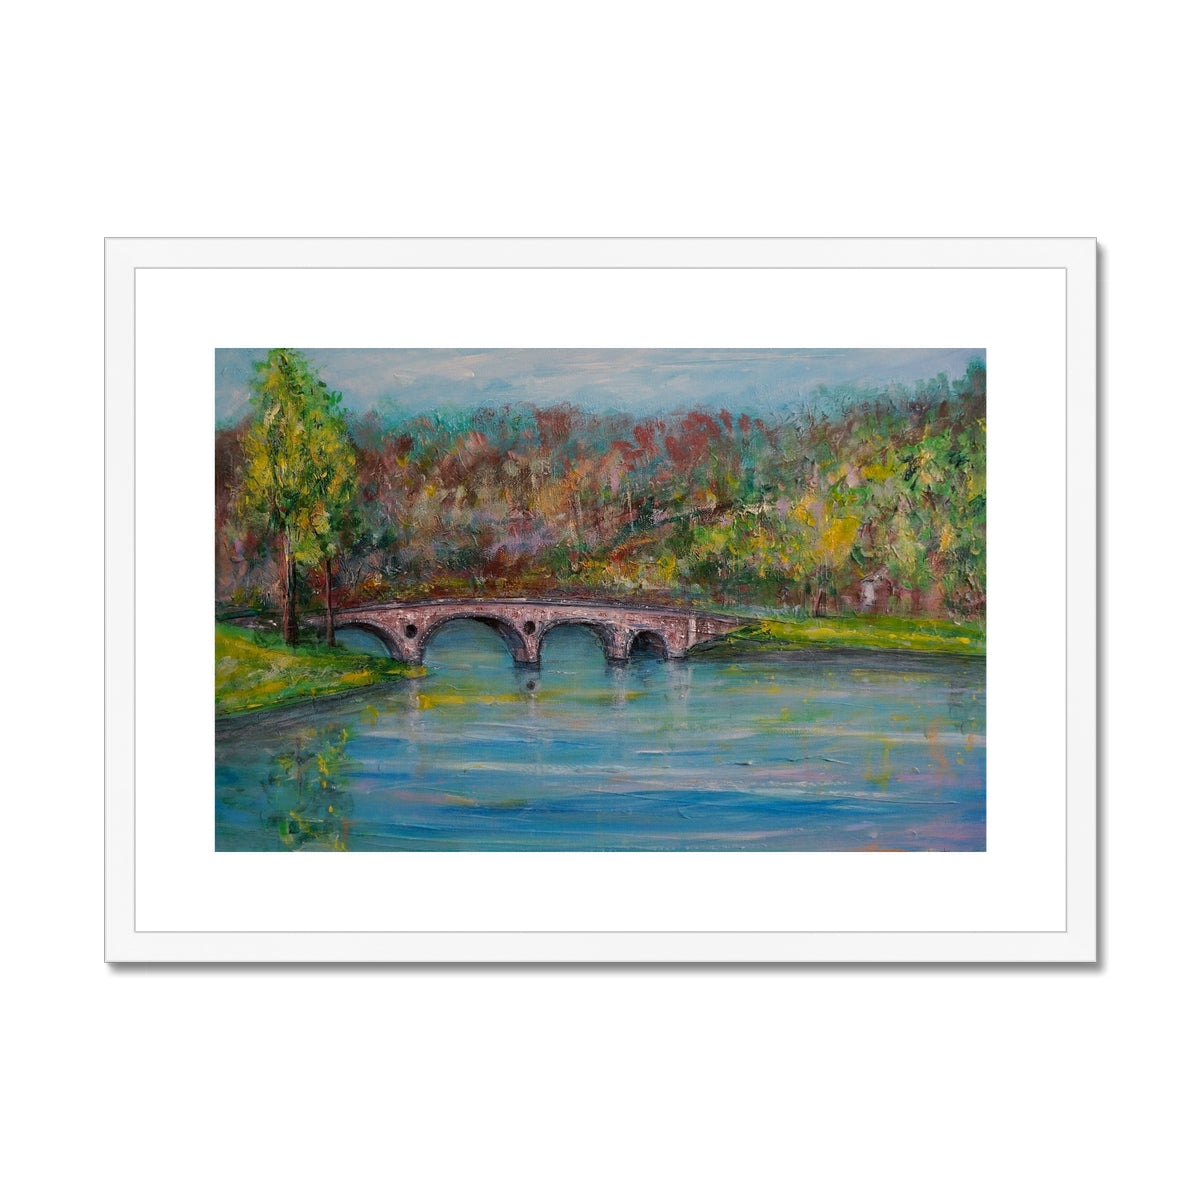 Kenmore Bridge Painting | Framed & Mounted Prints From Scotland-Framed & Mounted Prints-Scottish Highlands & Lowlands Art Gallery-A2 Landscape-White Frame-Paintings, Prints, Homeware, Art Gifts From Scotland By Scottish Artist Kevin Hunter